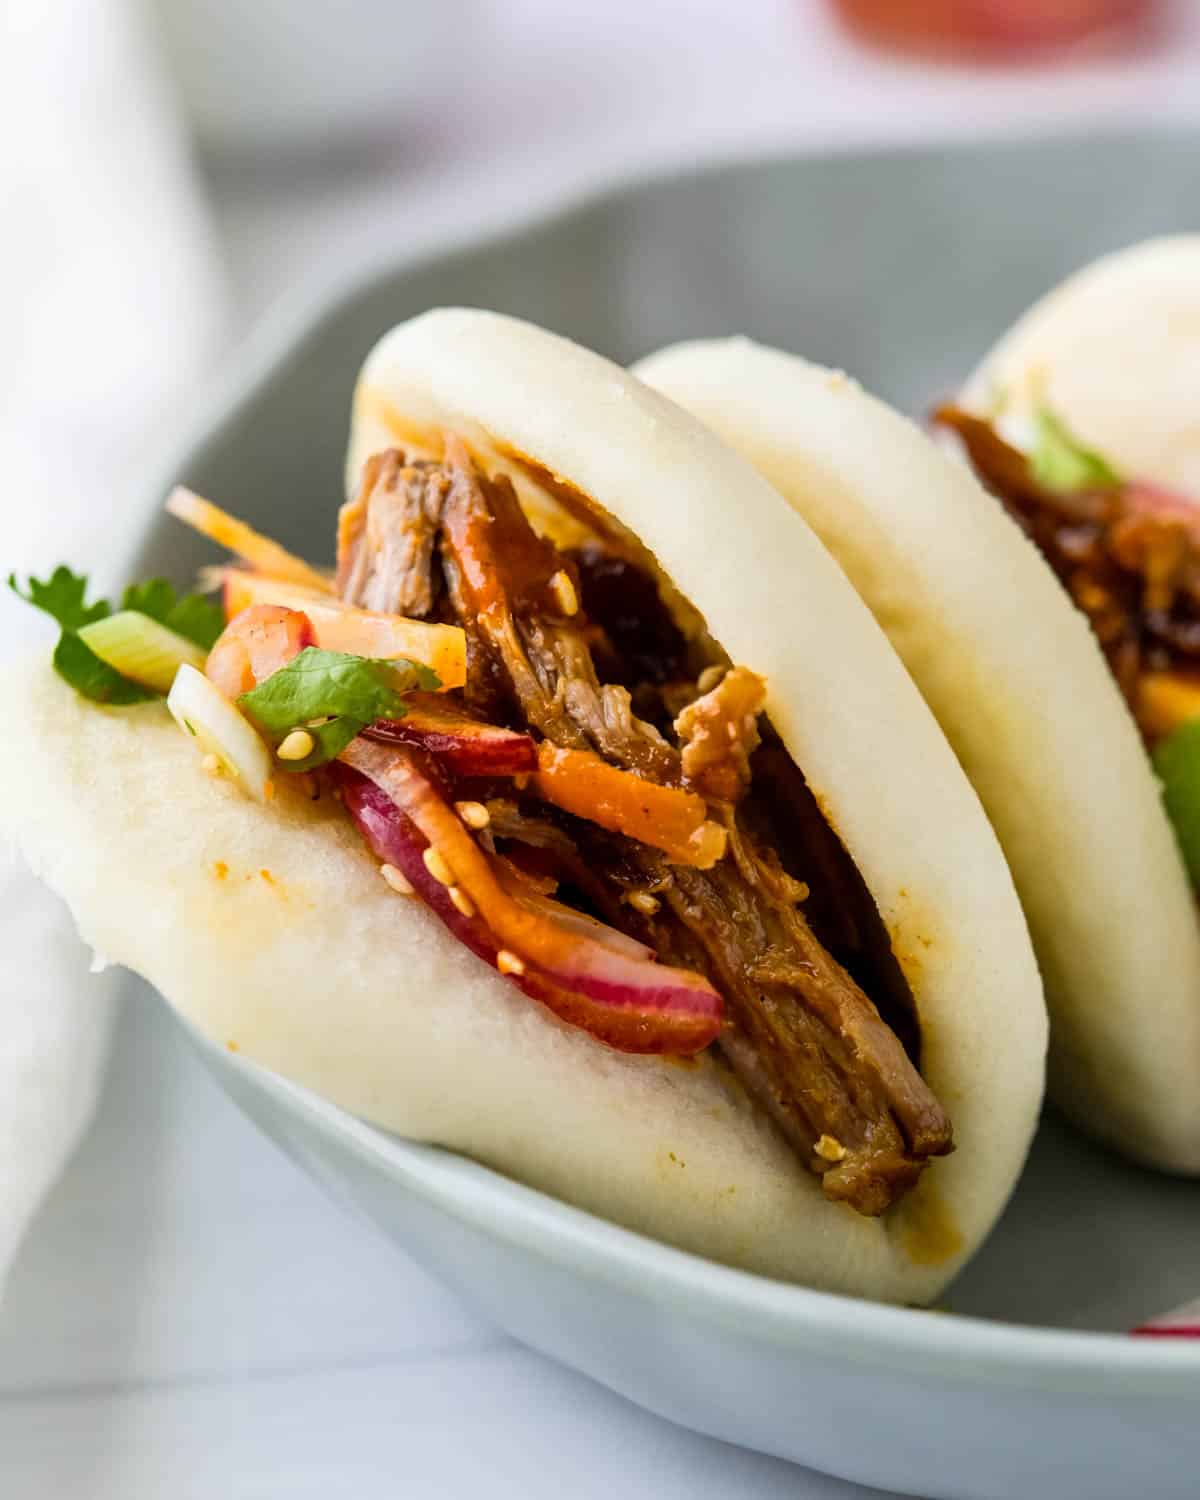 Tangy Asian BBQ Pulled Pork Buns